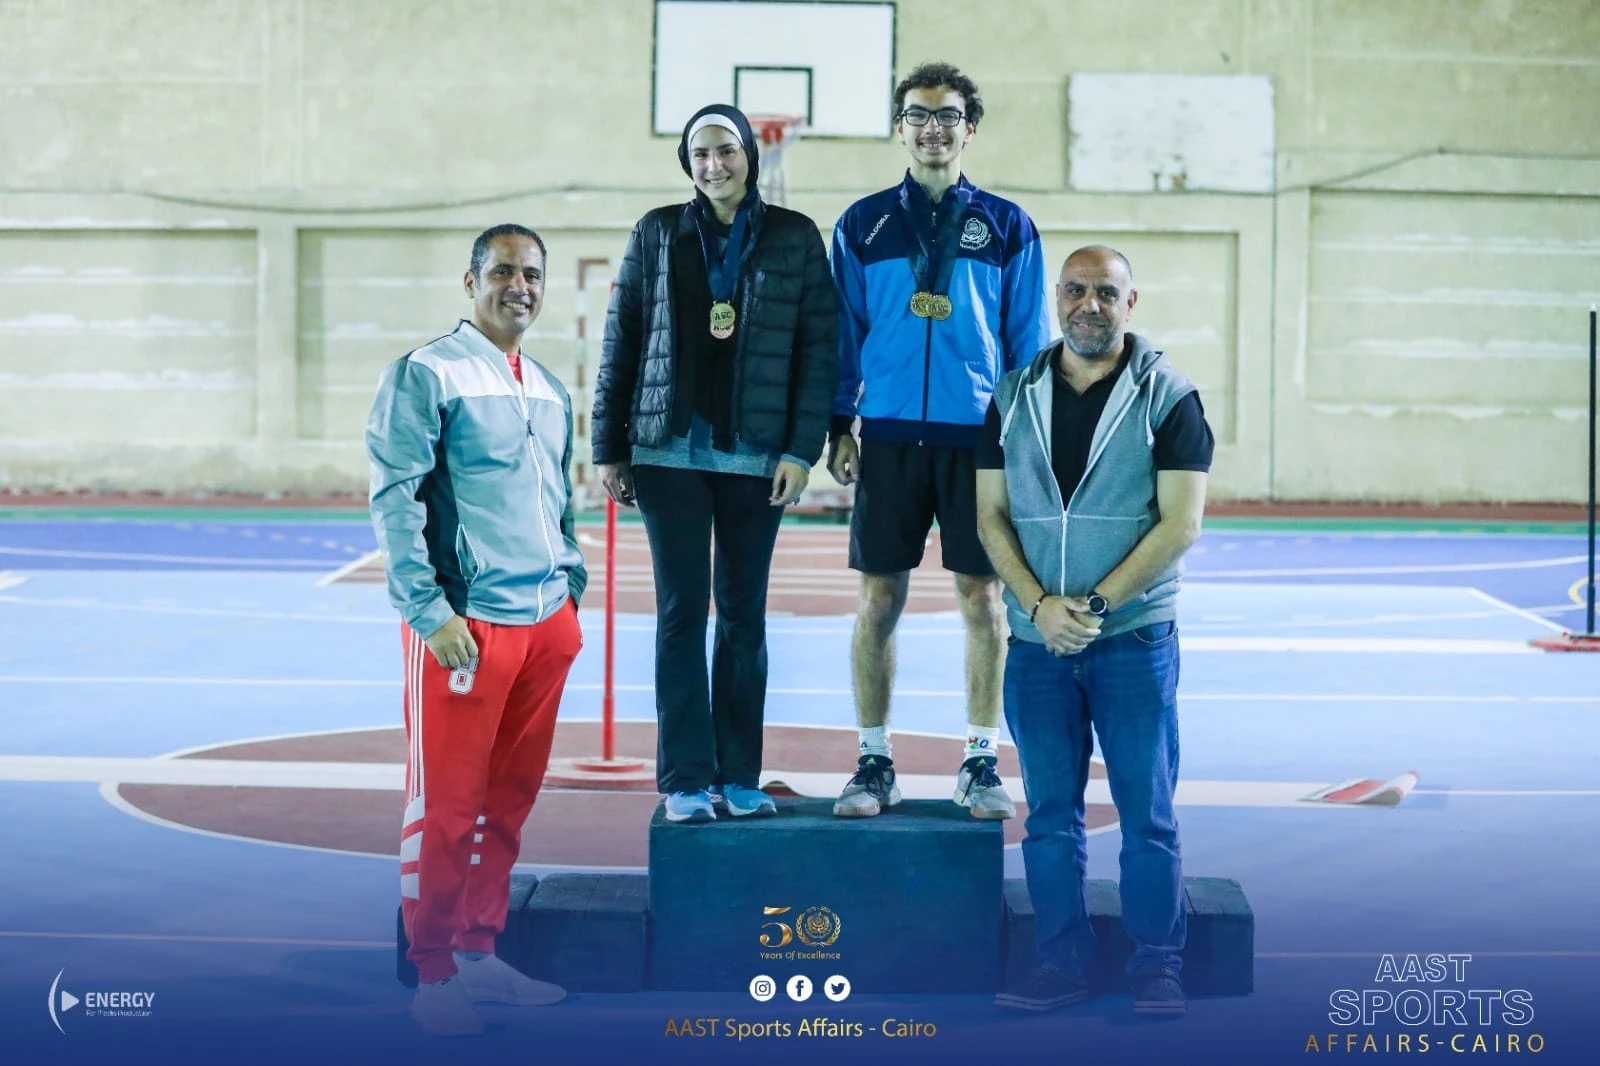 The academy was crowned in Cairo with the first place Cup in the student championship and the first place Cup in the female student championship in the private universities Speedball Championship9